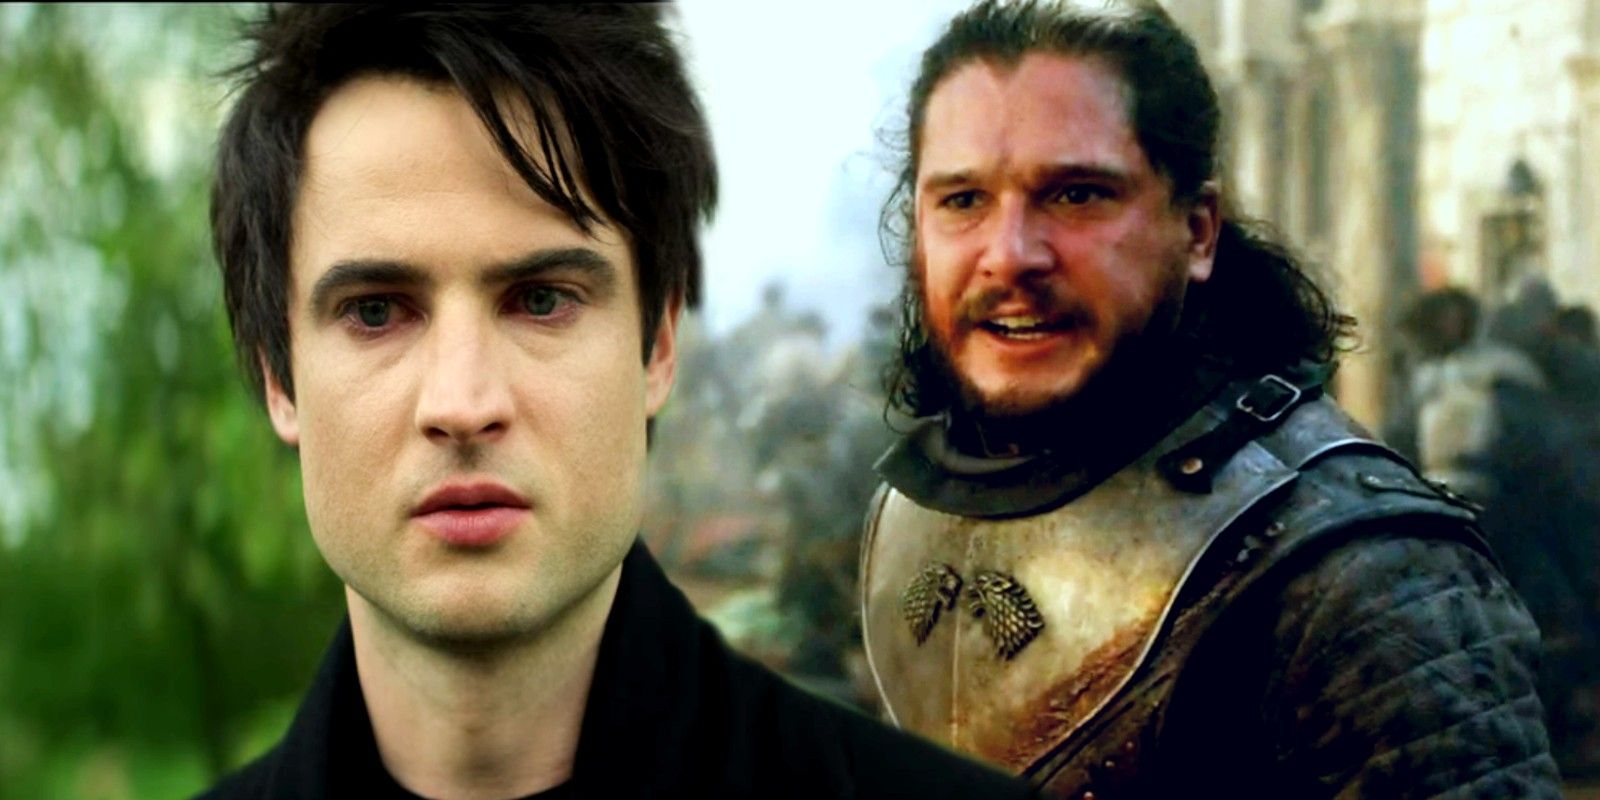 Blended image of Dream looking down in The Sandman and Jon Snow angry in Game of Thrones season 8